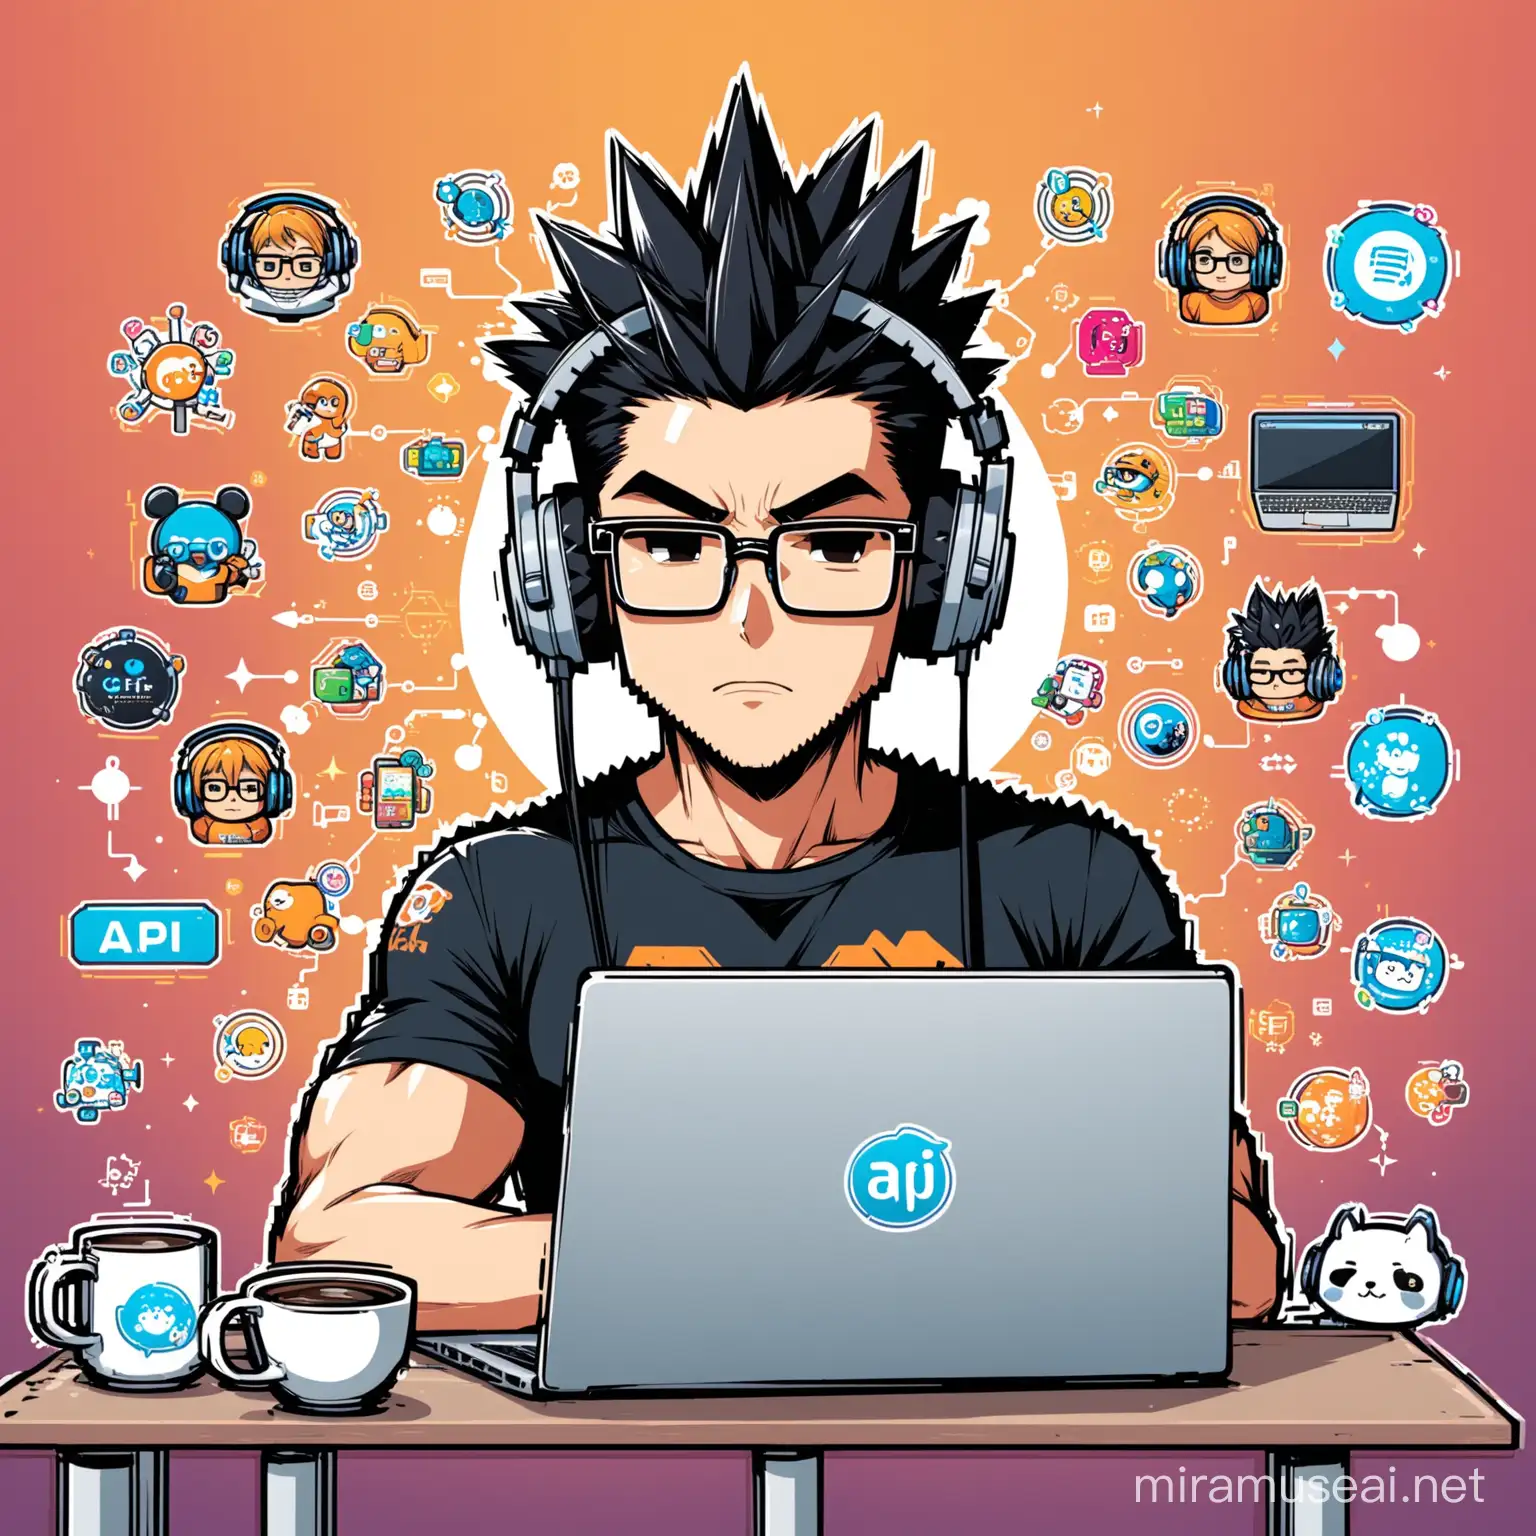 Create an image of a stylized, muscular anime character with spiky black hair, wearing headphones and a t-shirt with 'API addicts' printed on it. The character has glasses and a focused, contemplative expression, gazing at the screen of a laptop covered in various technology-related stickers. Beside the laptop is a mug with a caffeine molecule printed on it, suggesting the character is a developer or programmer deeply immersed in their work. The setting is minimal, emphasizing the character and their tech gear. Character look in laptop. There are stickers on laptop: JAVA, MULESOFT, GIT HUB, 
